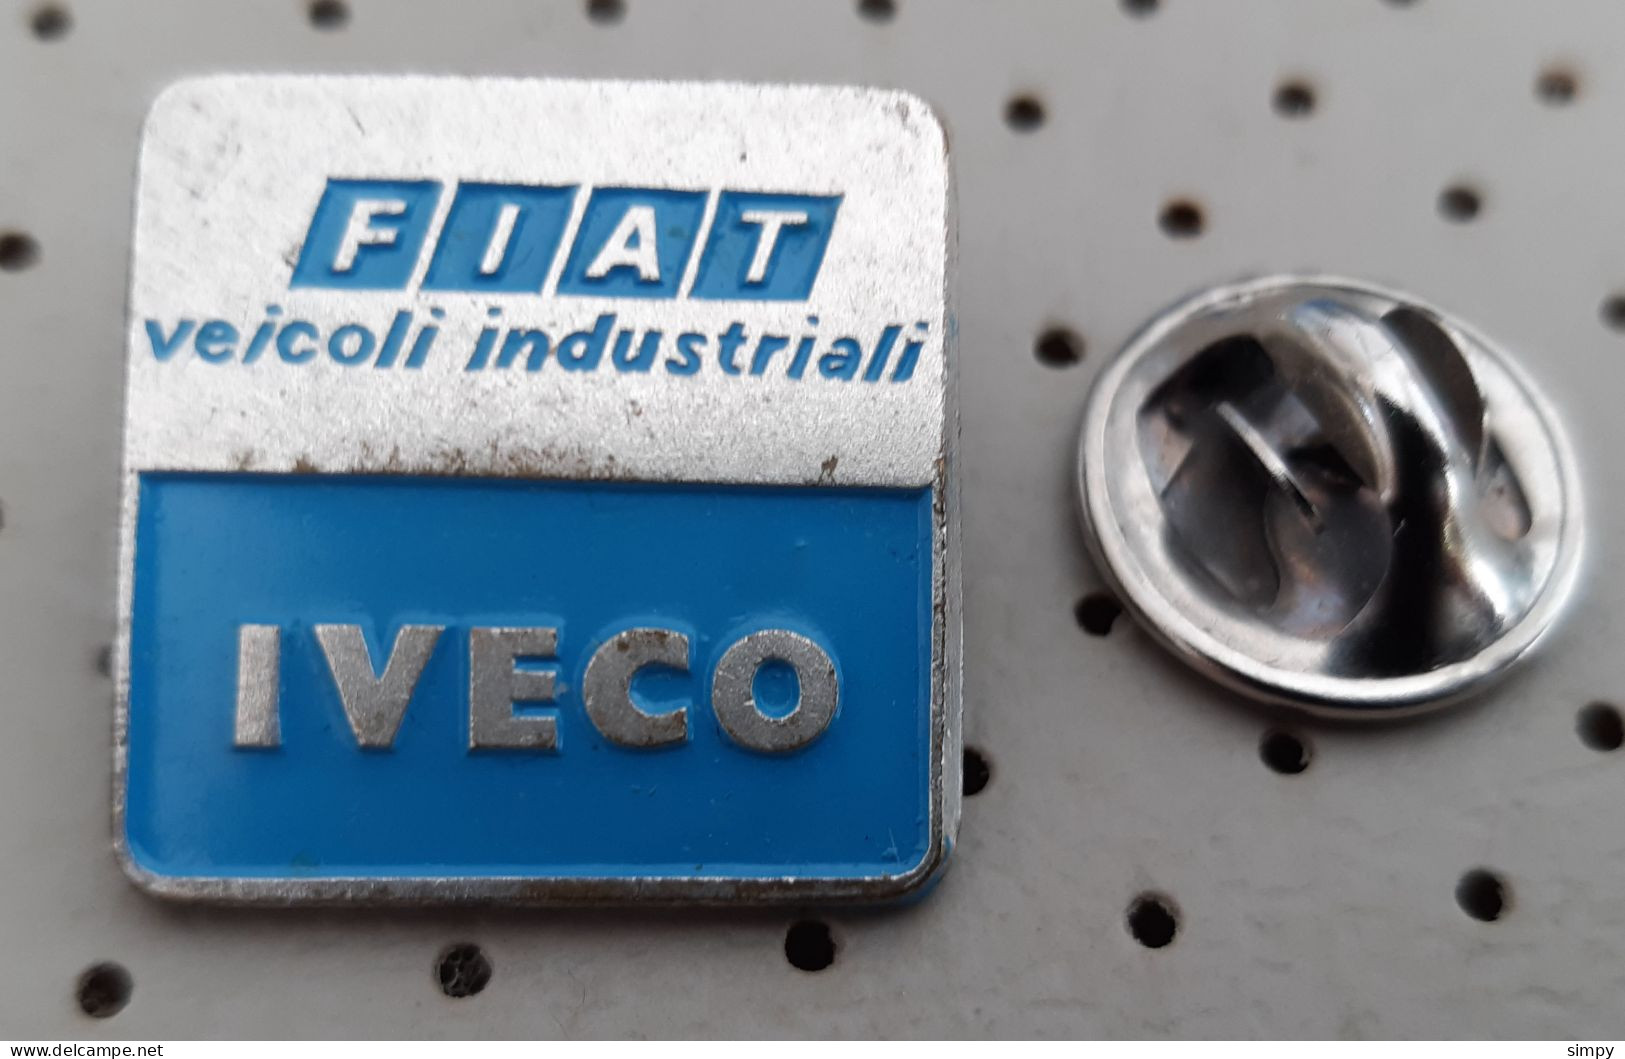 FIAT IVECO Car Logo Italy Vintage Pin Badge Size 17x17mm - Fiat